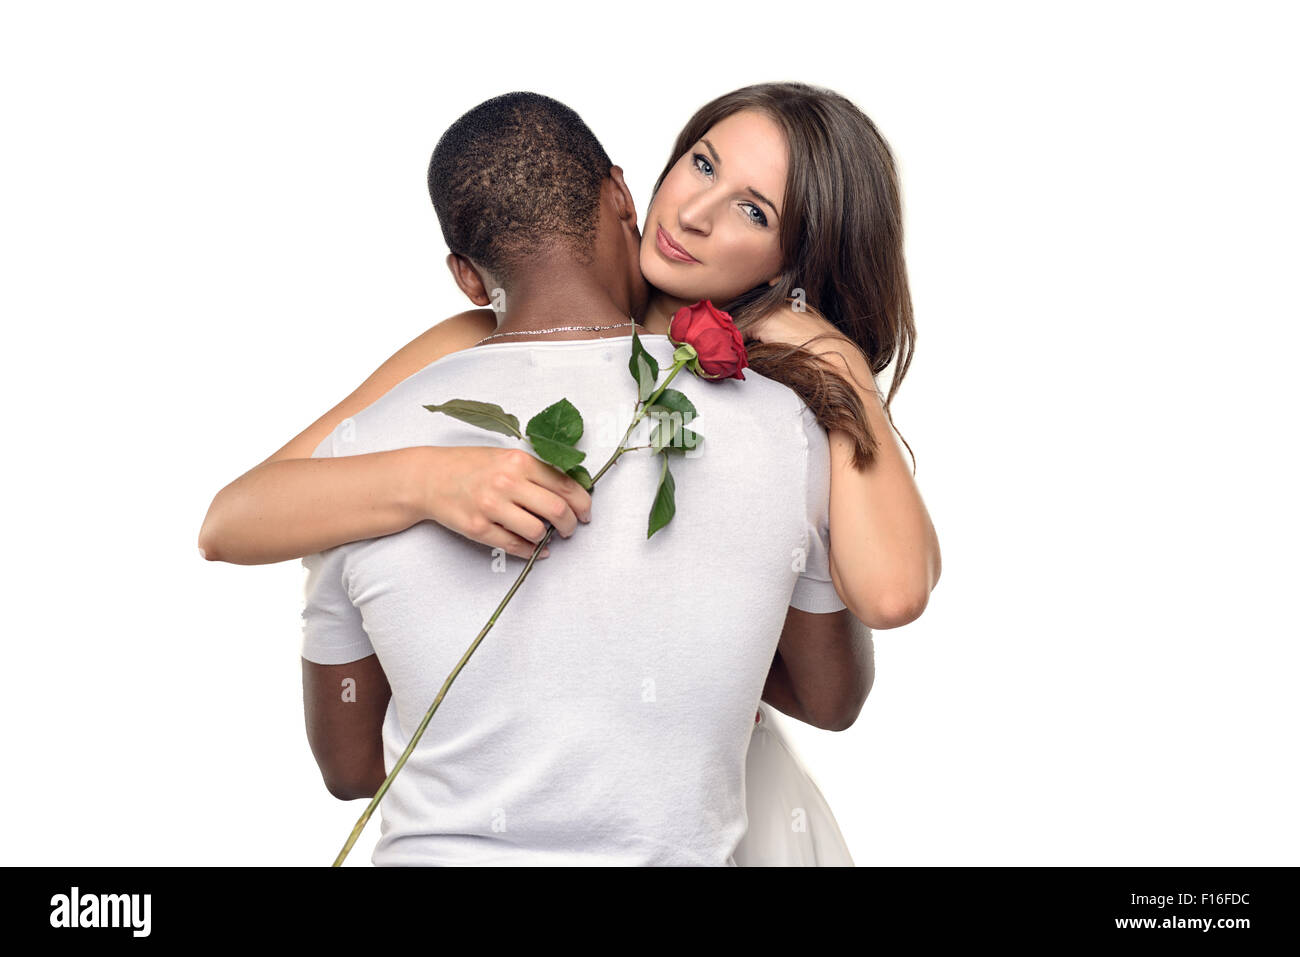 Sentimental young woman hugging her boyfriend or sweetheart as she smiles tenderly down at a single red rose he has just given h Stock Photo